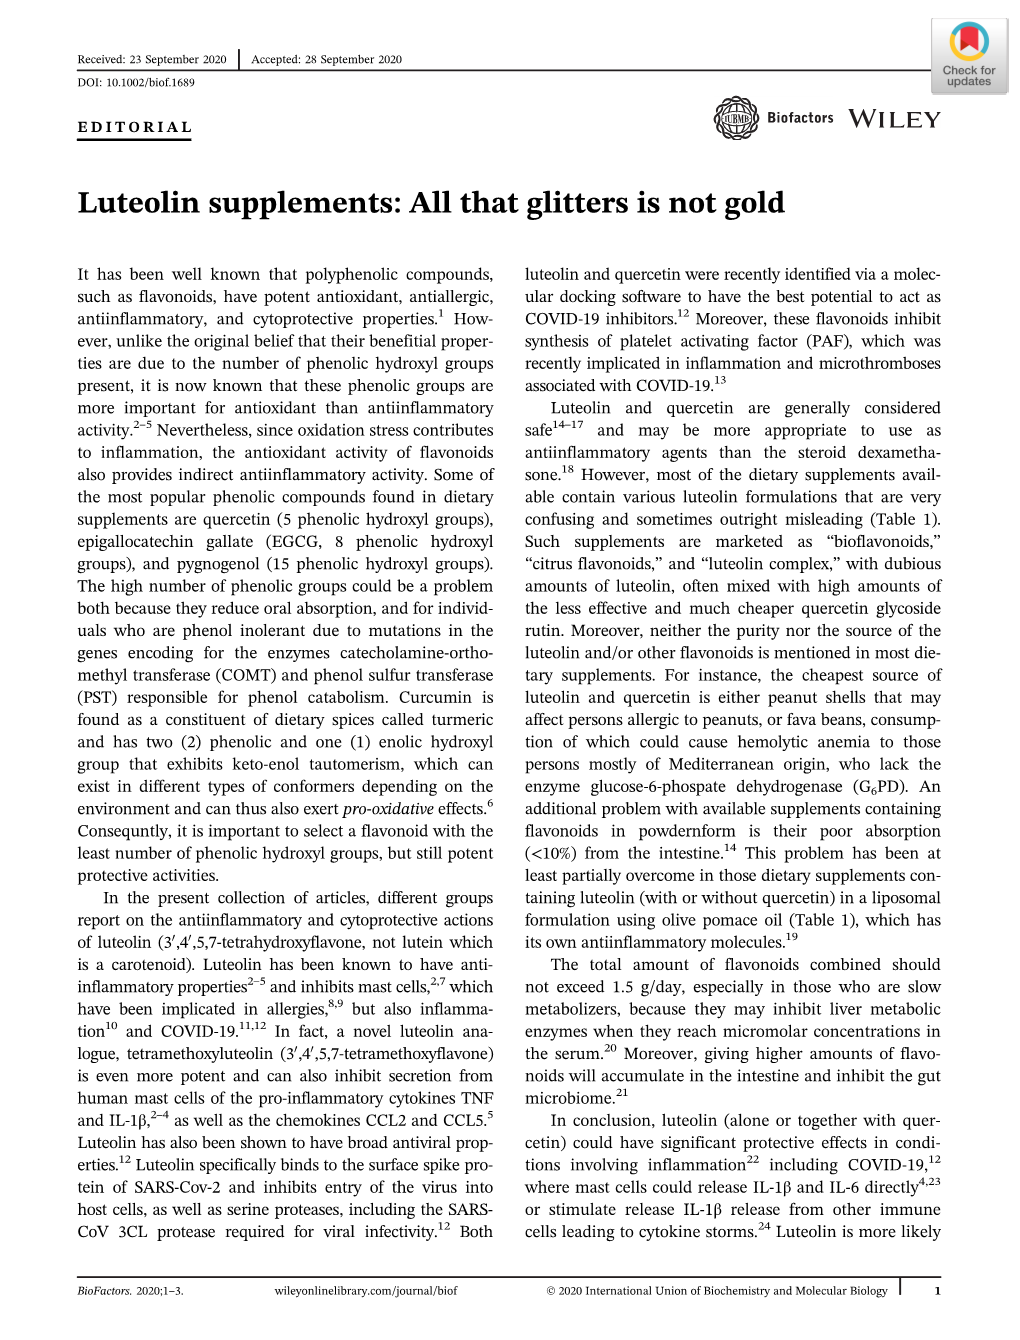 Luteolin Supplements: All That Glitters Is Not Gold